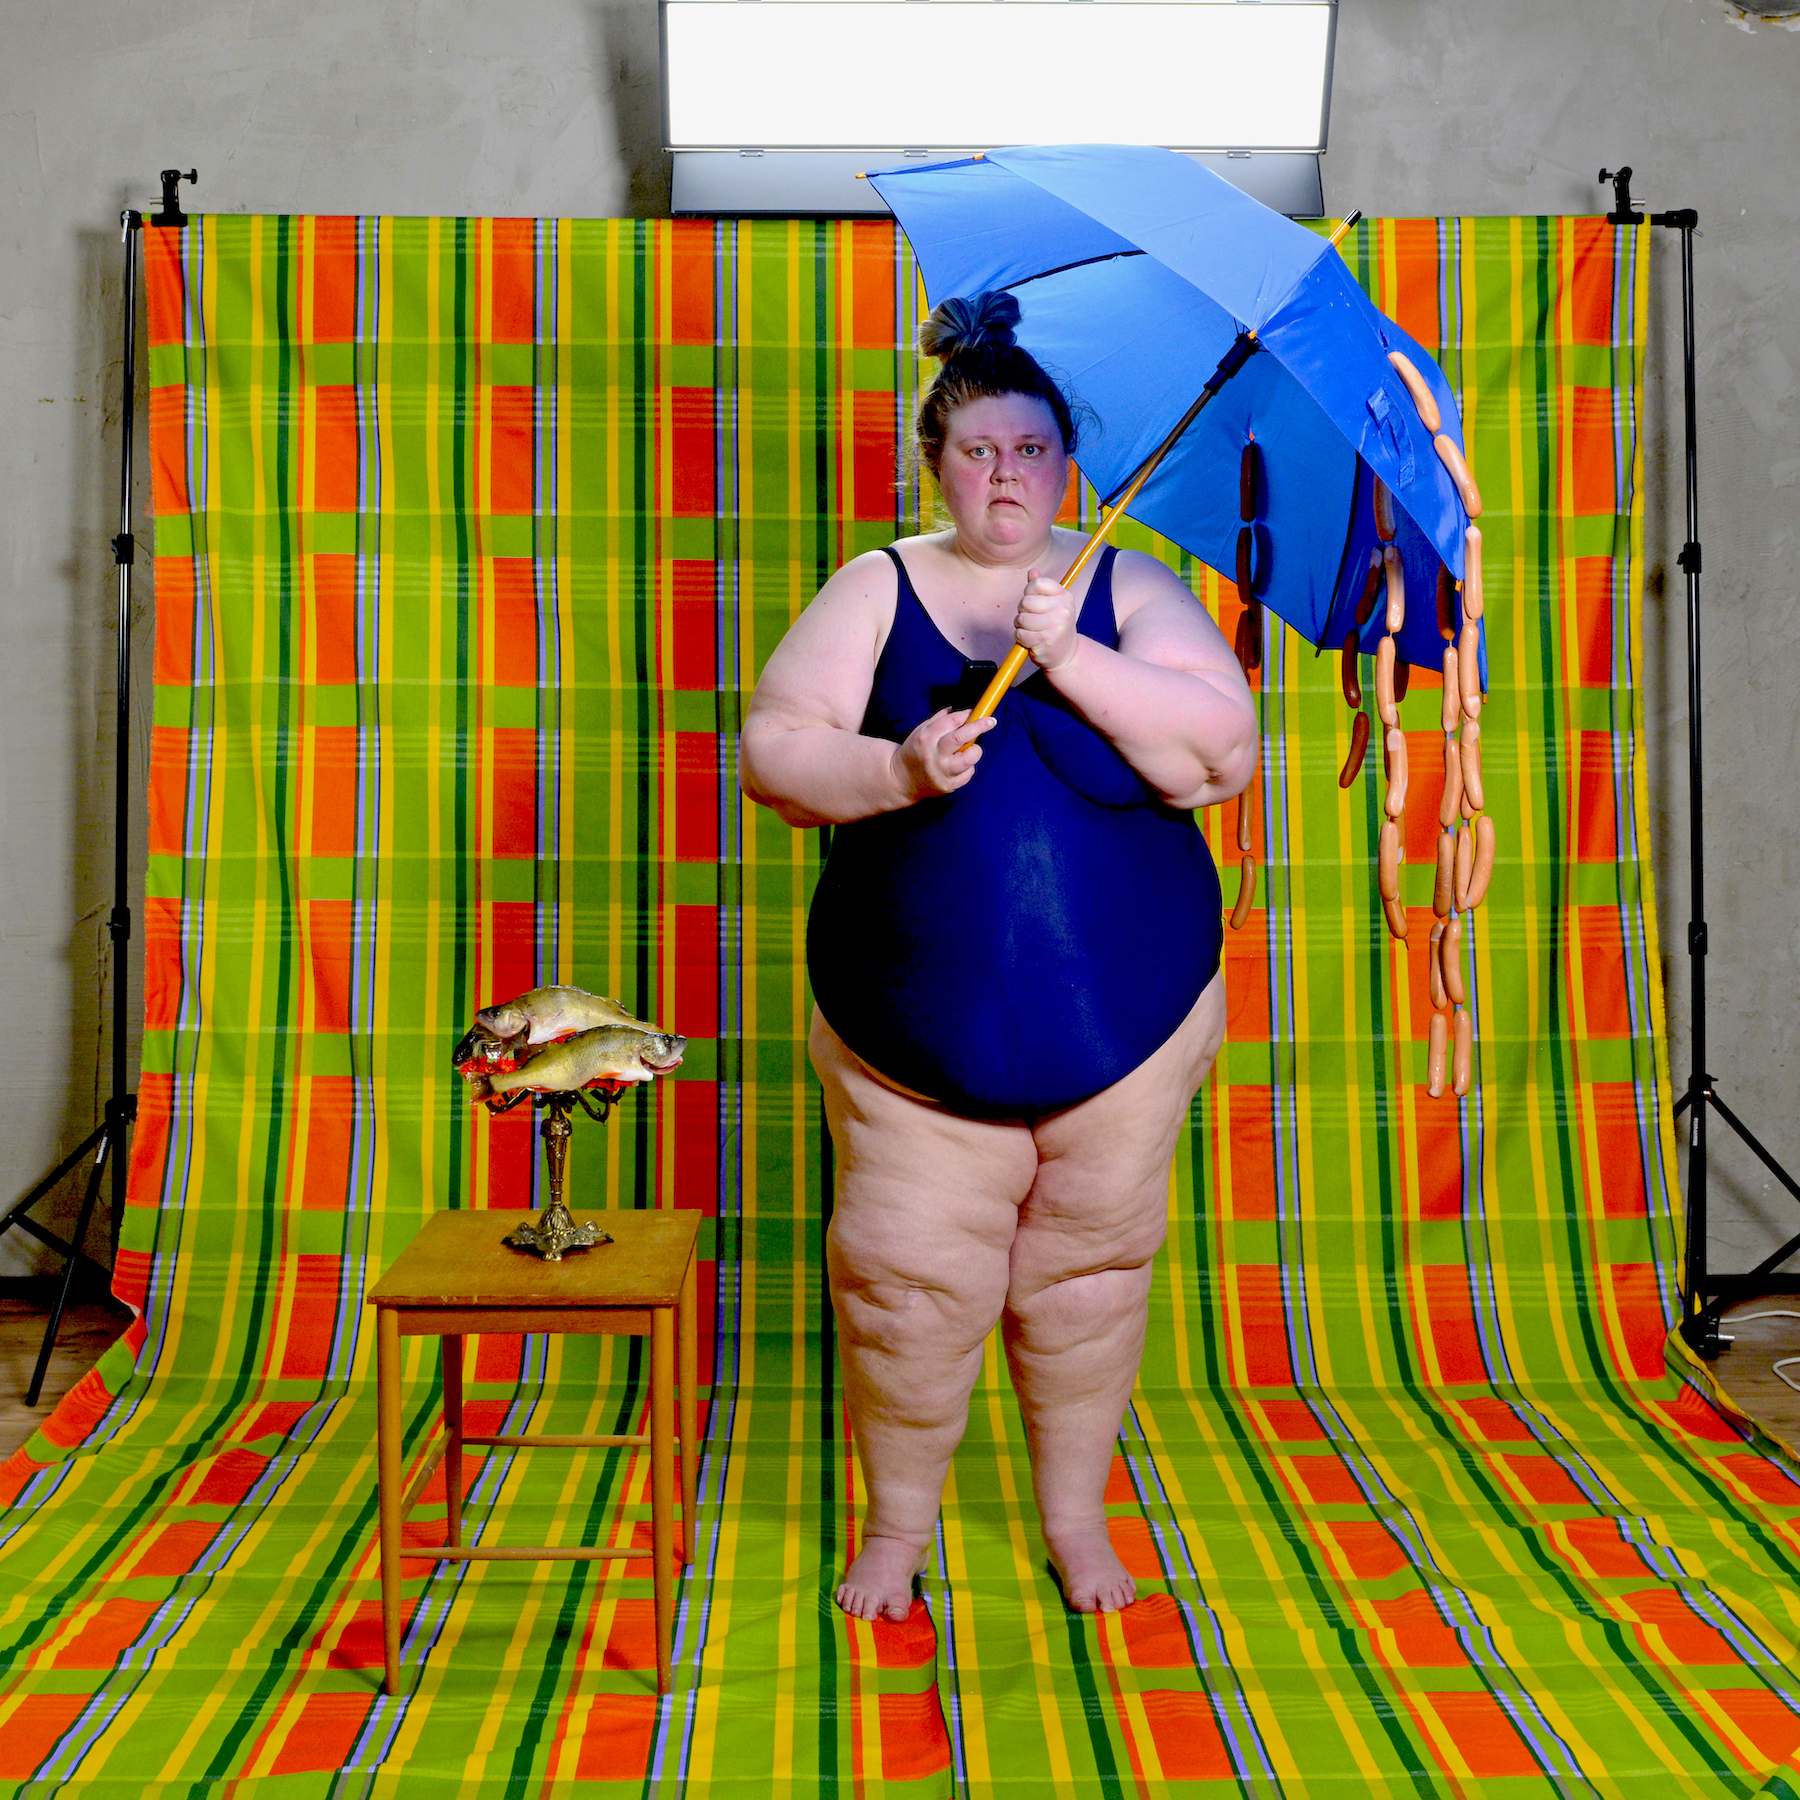 A person wearing a bathing suit in front of a colourful studio backdrop. They are holding an umbrella with sausages hanging from it. Next to them is a small table with a candle holder and toy fishes on it.